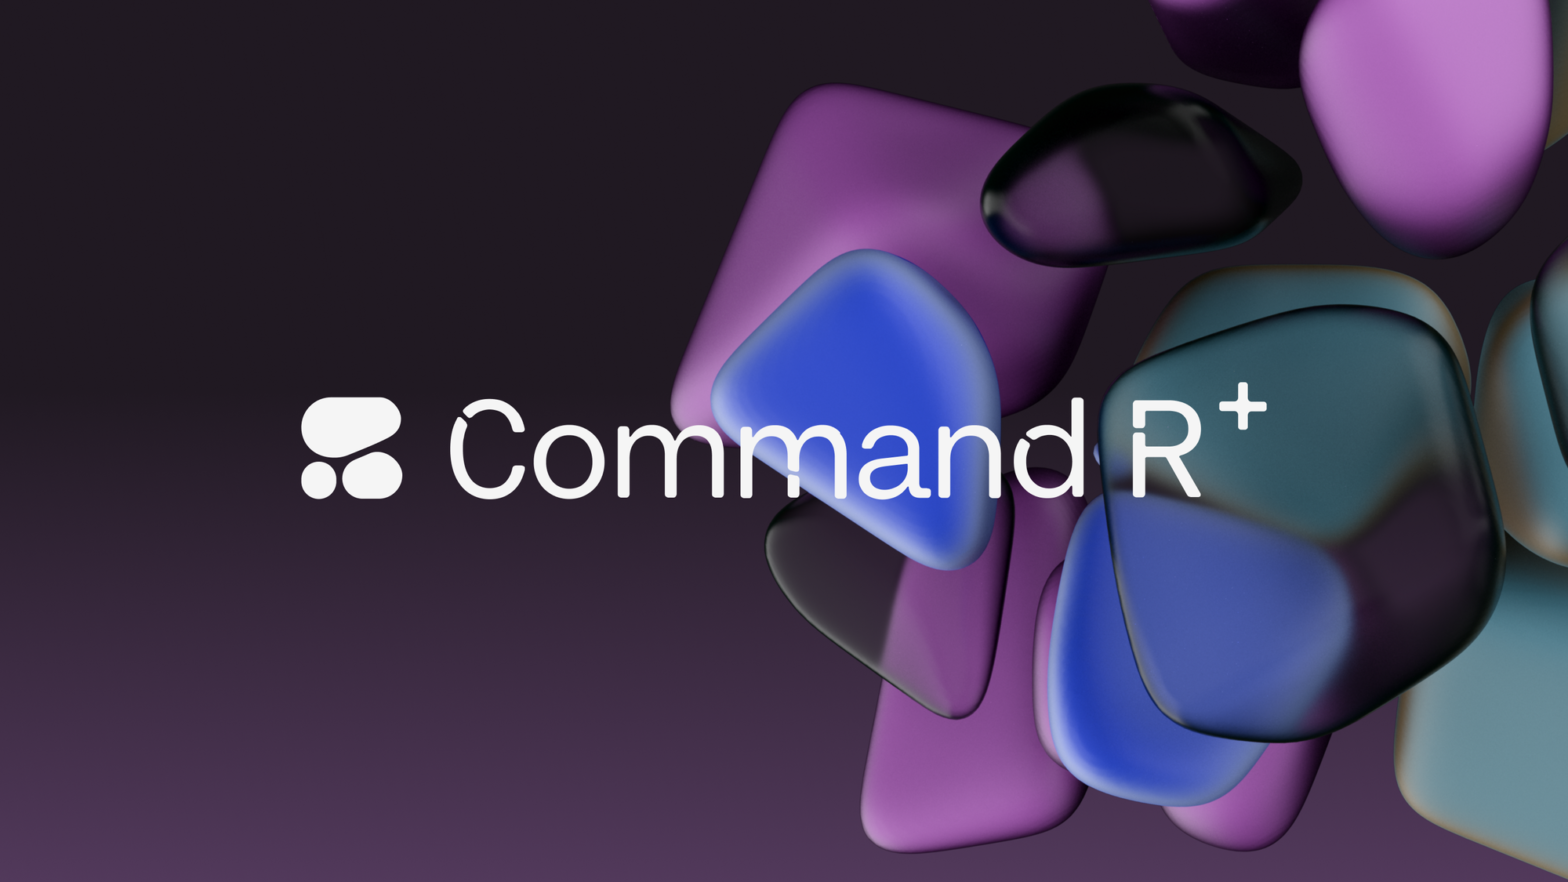 command r+